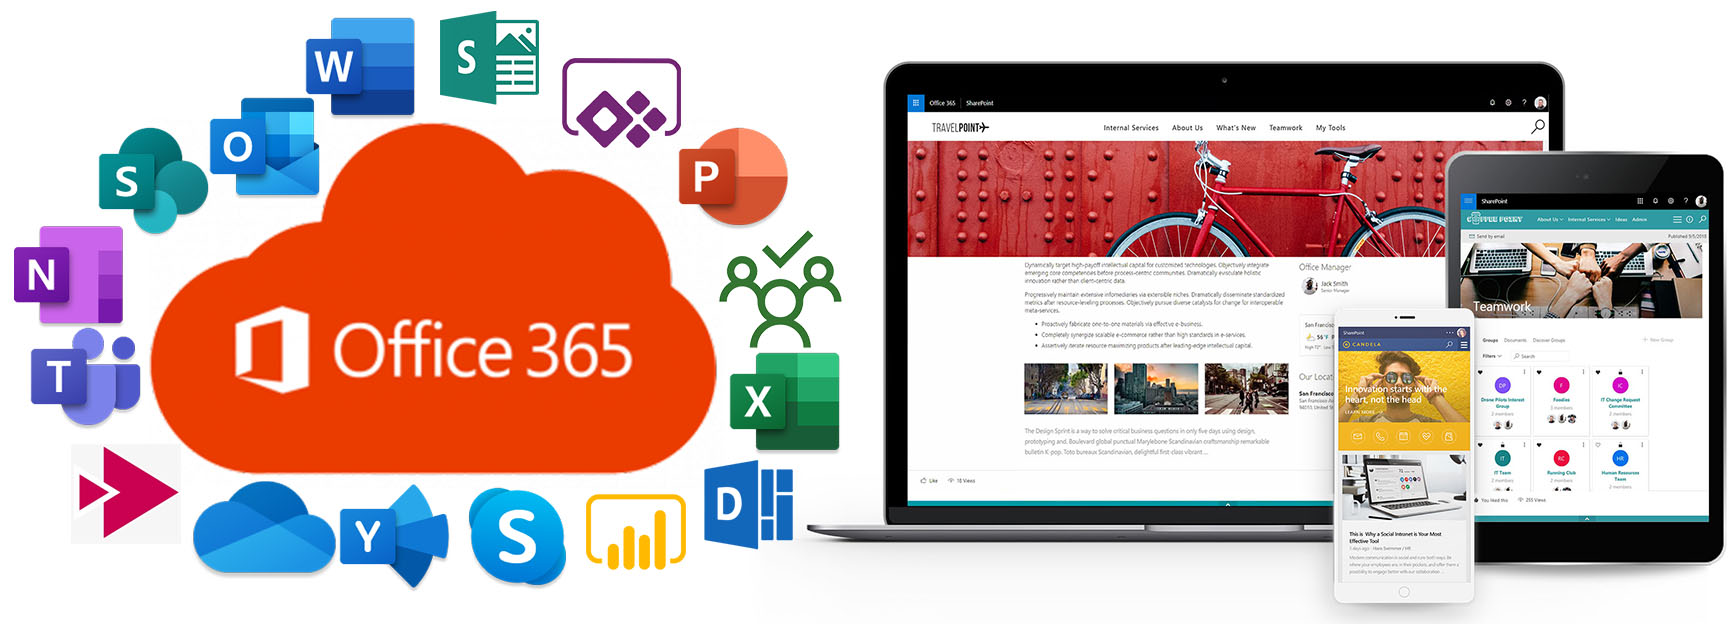 Envision IT, Valo, and Office 365